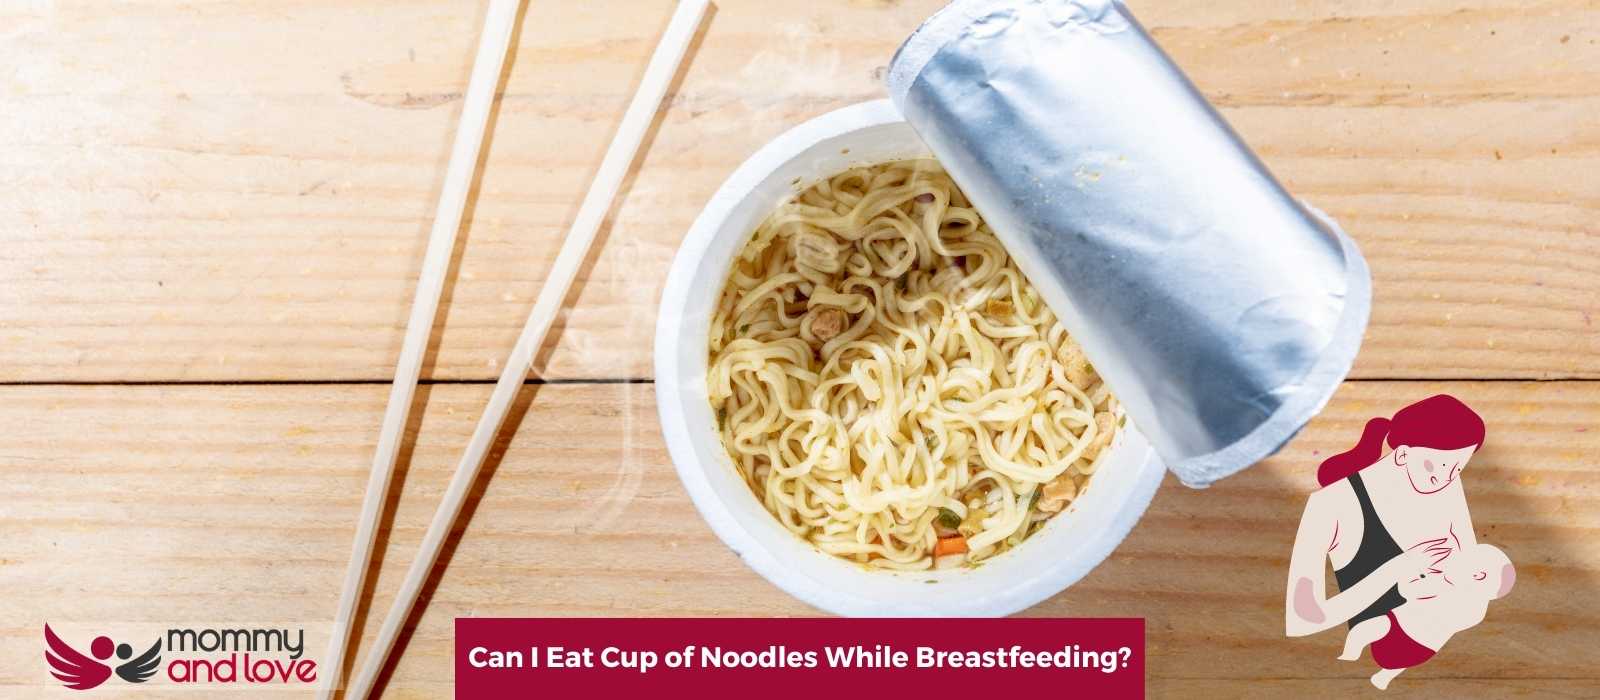 Can I Eat Cup of Noodles While Breastfeeding